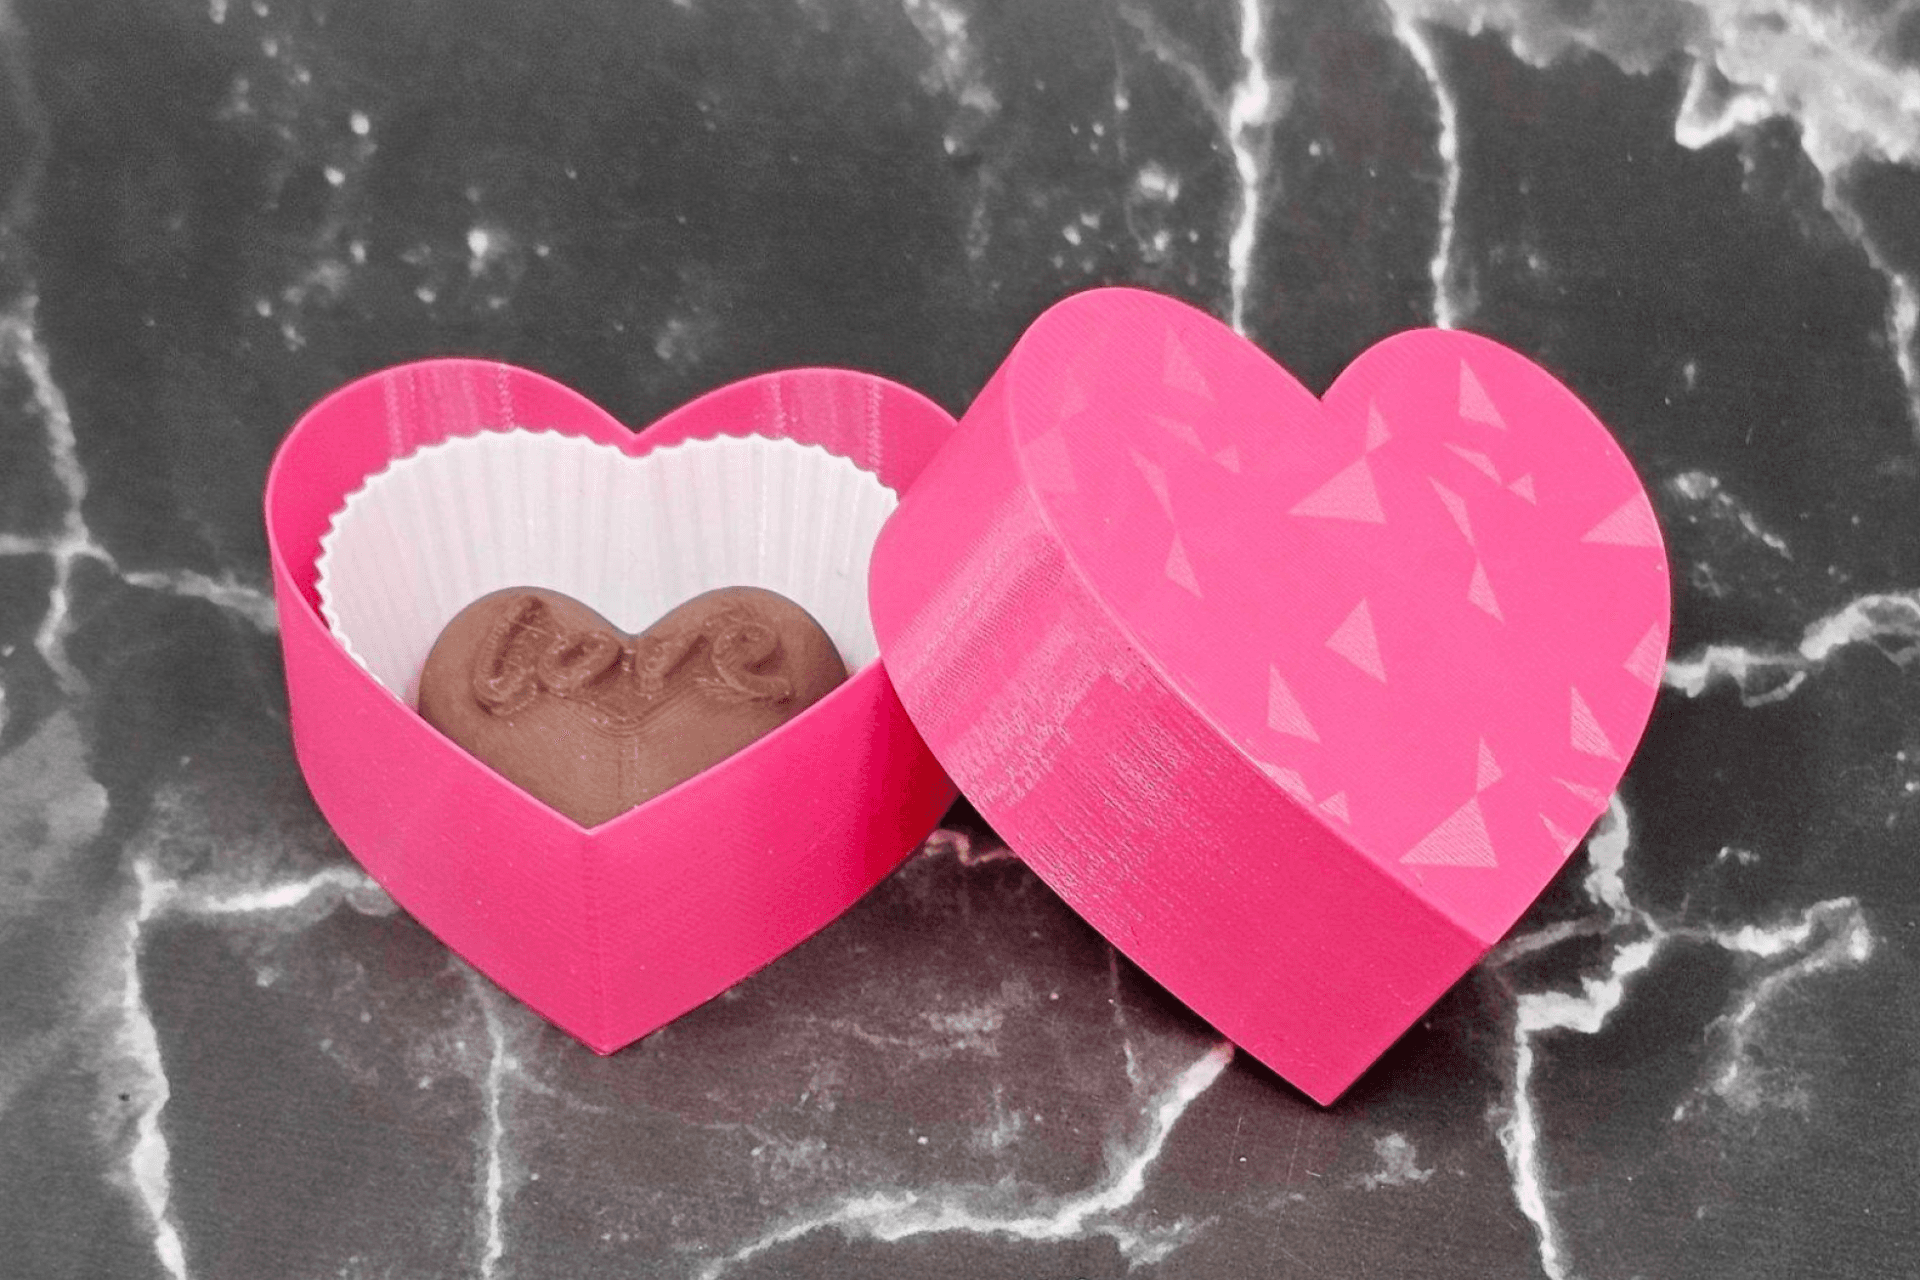 "love" chocolate heart | candy cup | vase mode heart-shaped box by Karen Chau Designs